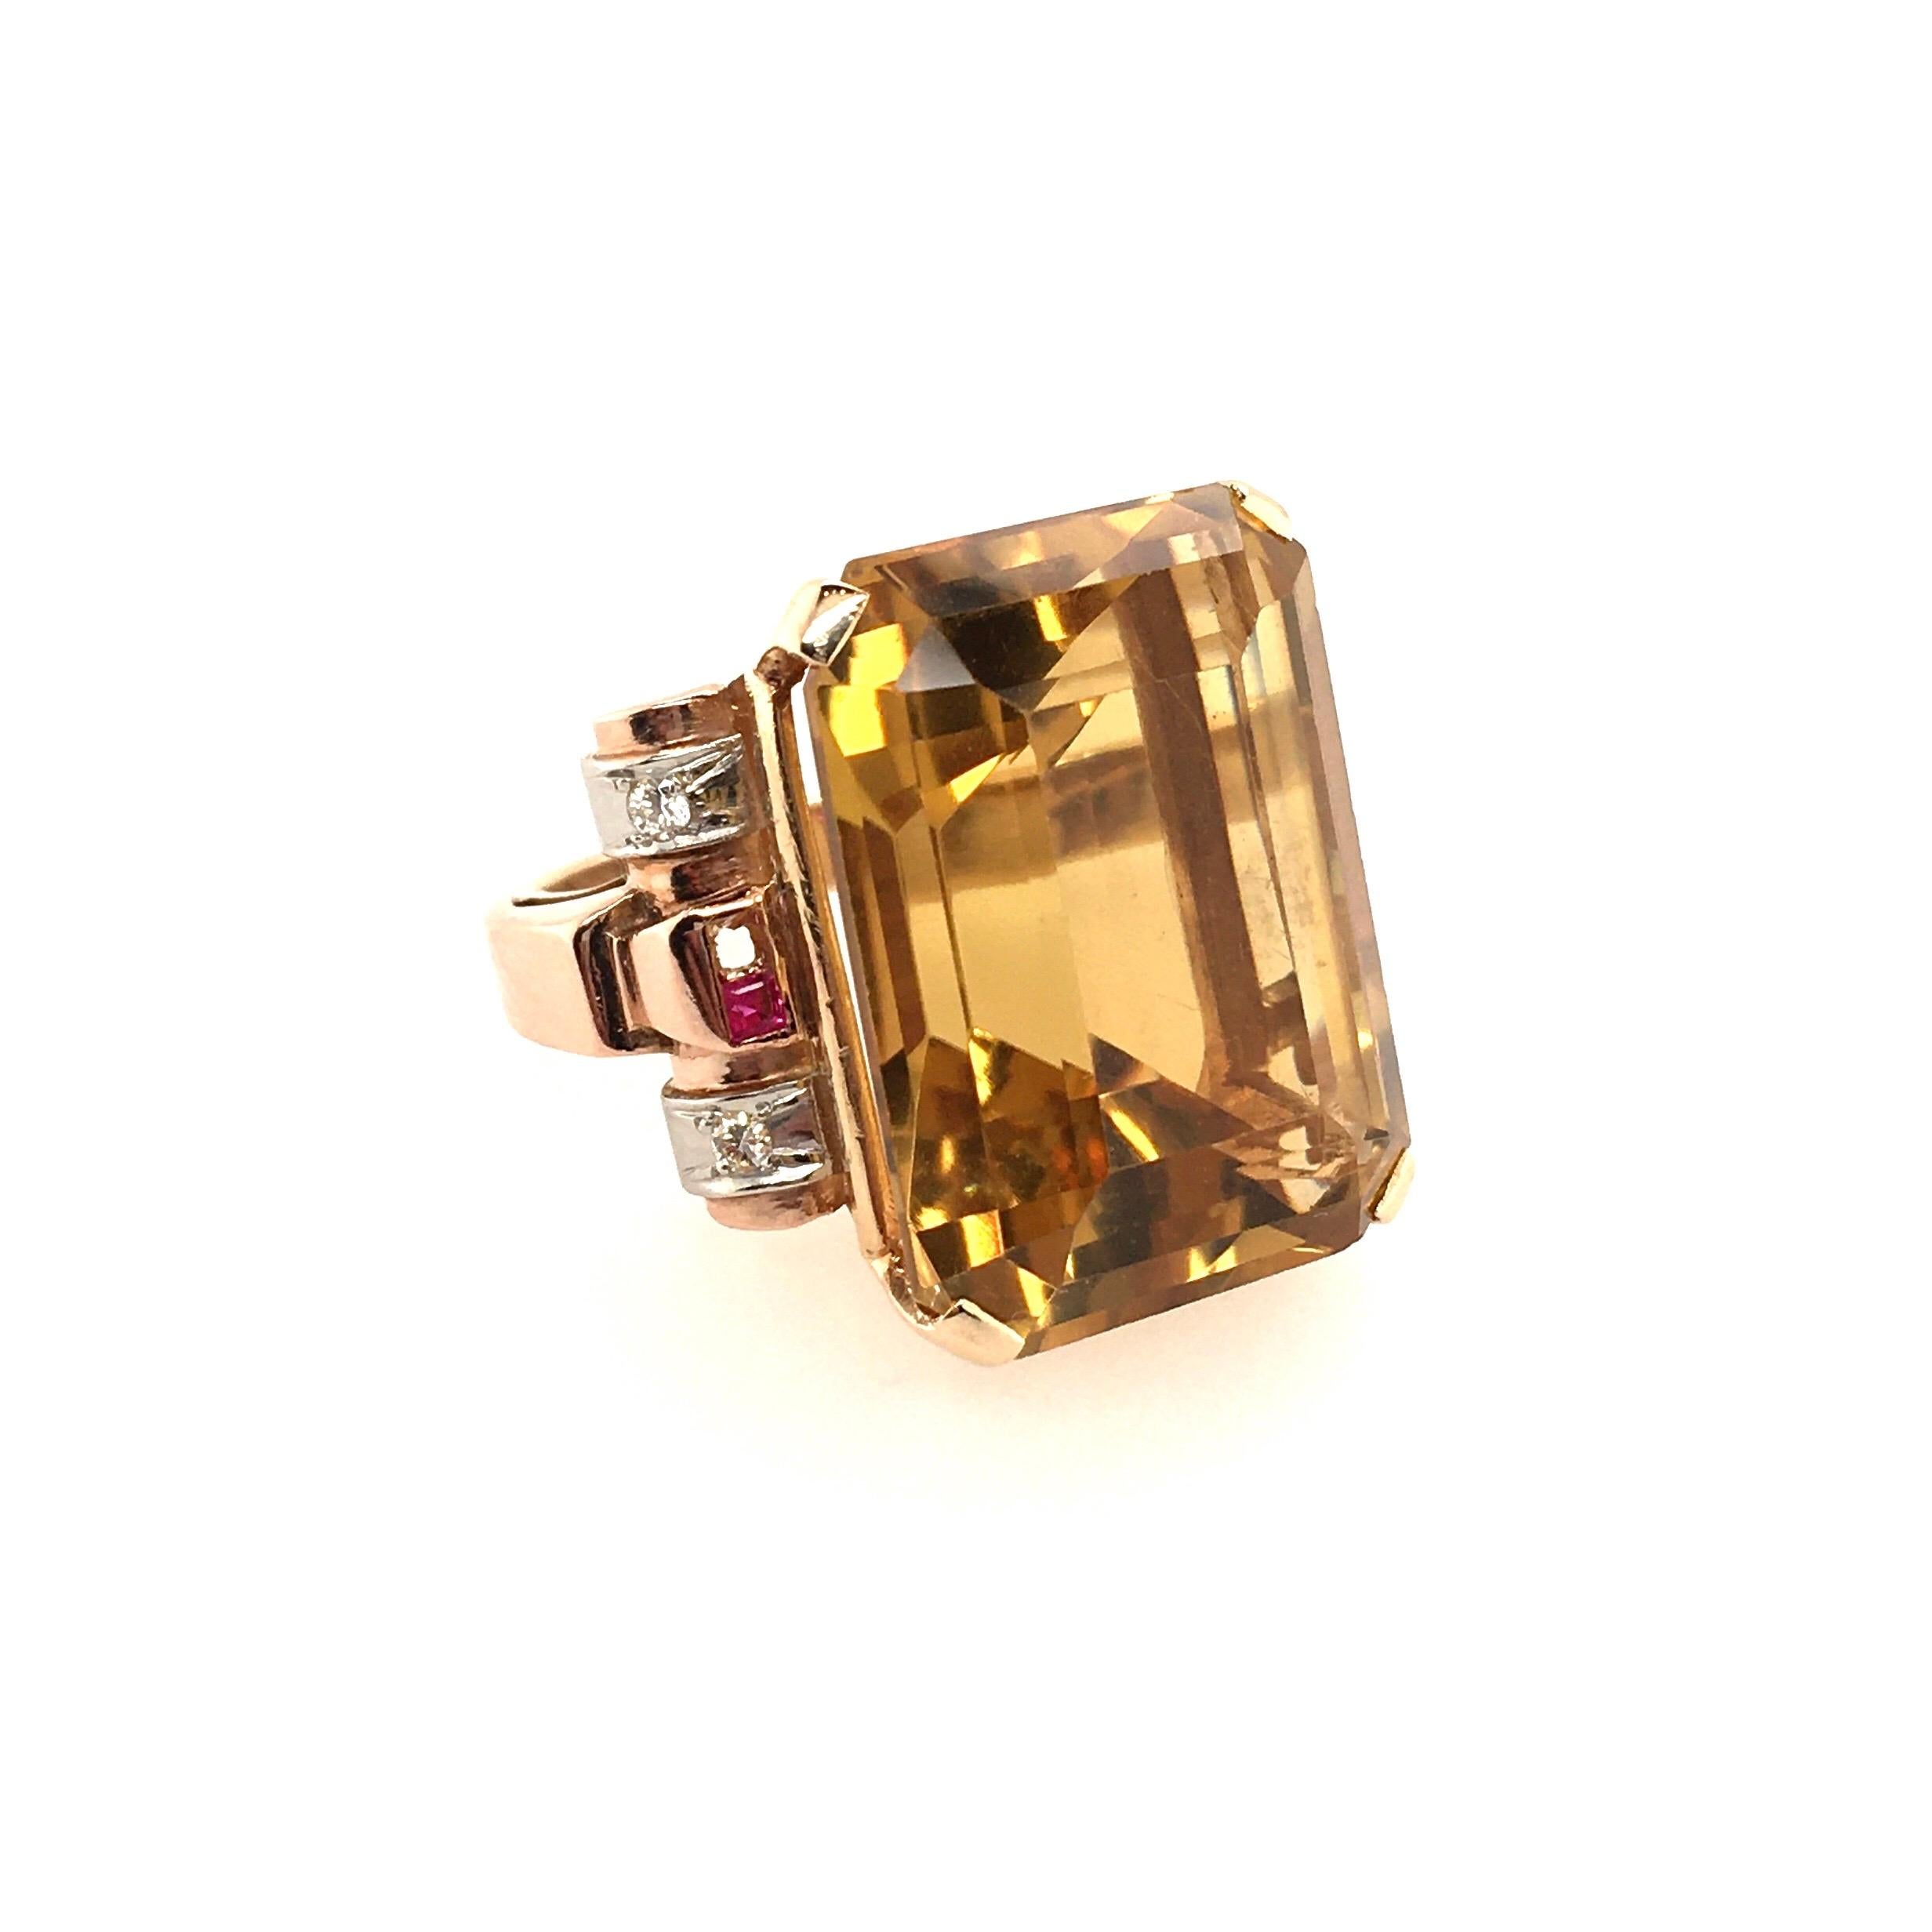  A 14 karat yellow gold, citrine, ruby and diamond ring. Circa 1940. Set with an emerald cut citrine, measuring approximately 22.5 x 17.0mm, enhanced by scroll shoulders, set with square cut ruby shoulders, enhanced by circular cut diamonds. Size 5,